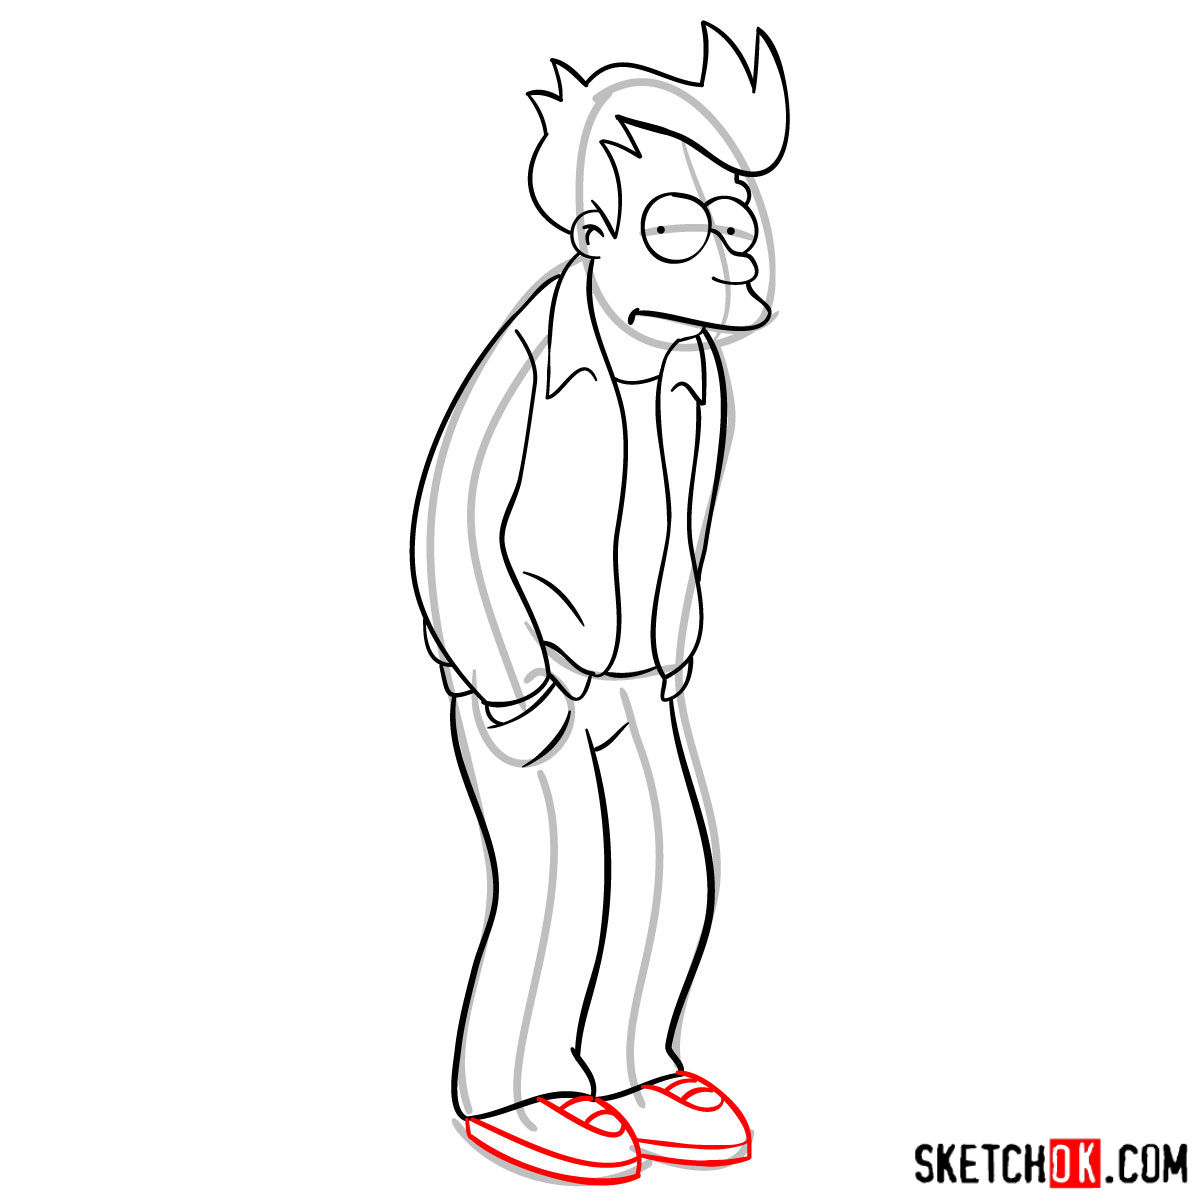 How to draw Philip J. Fry step by step - step 09